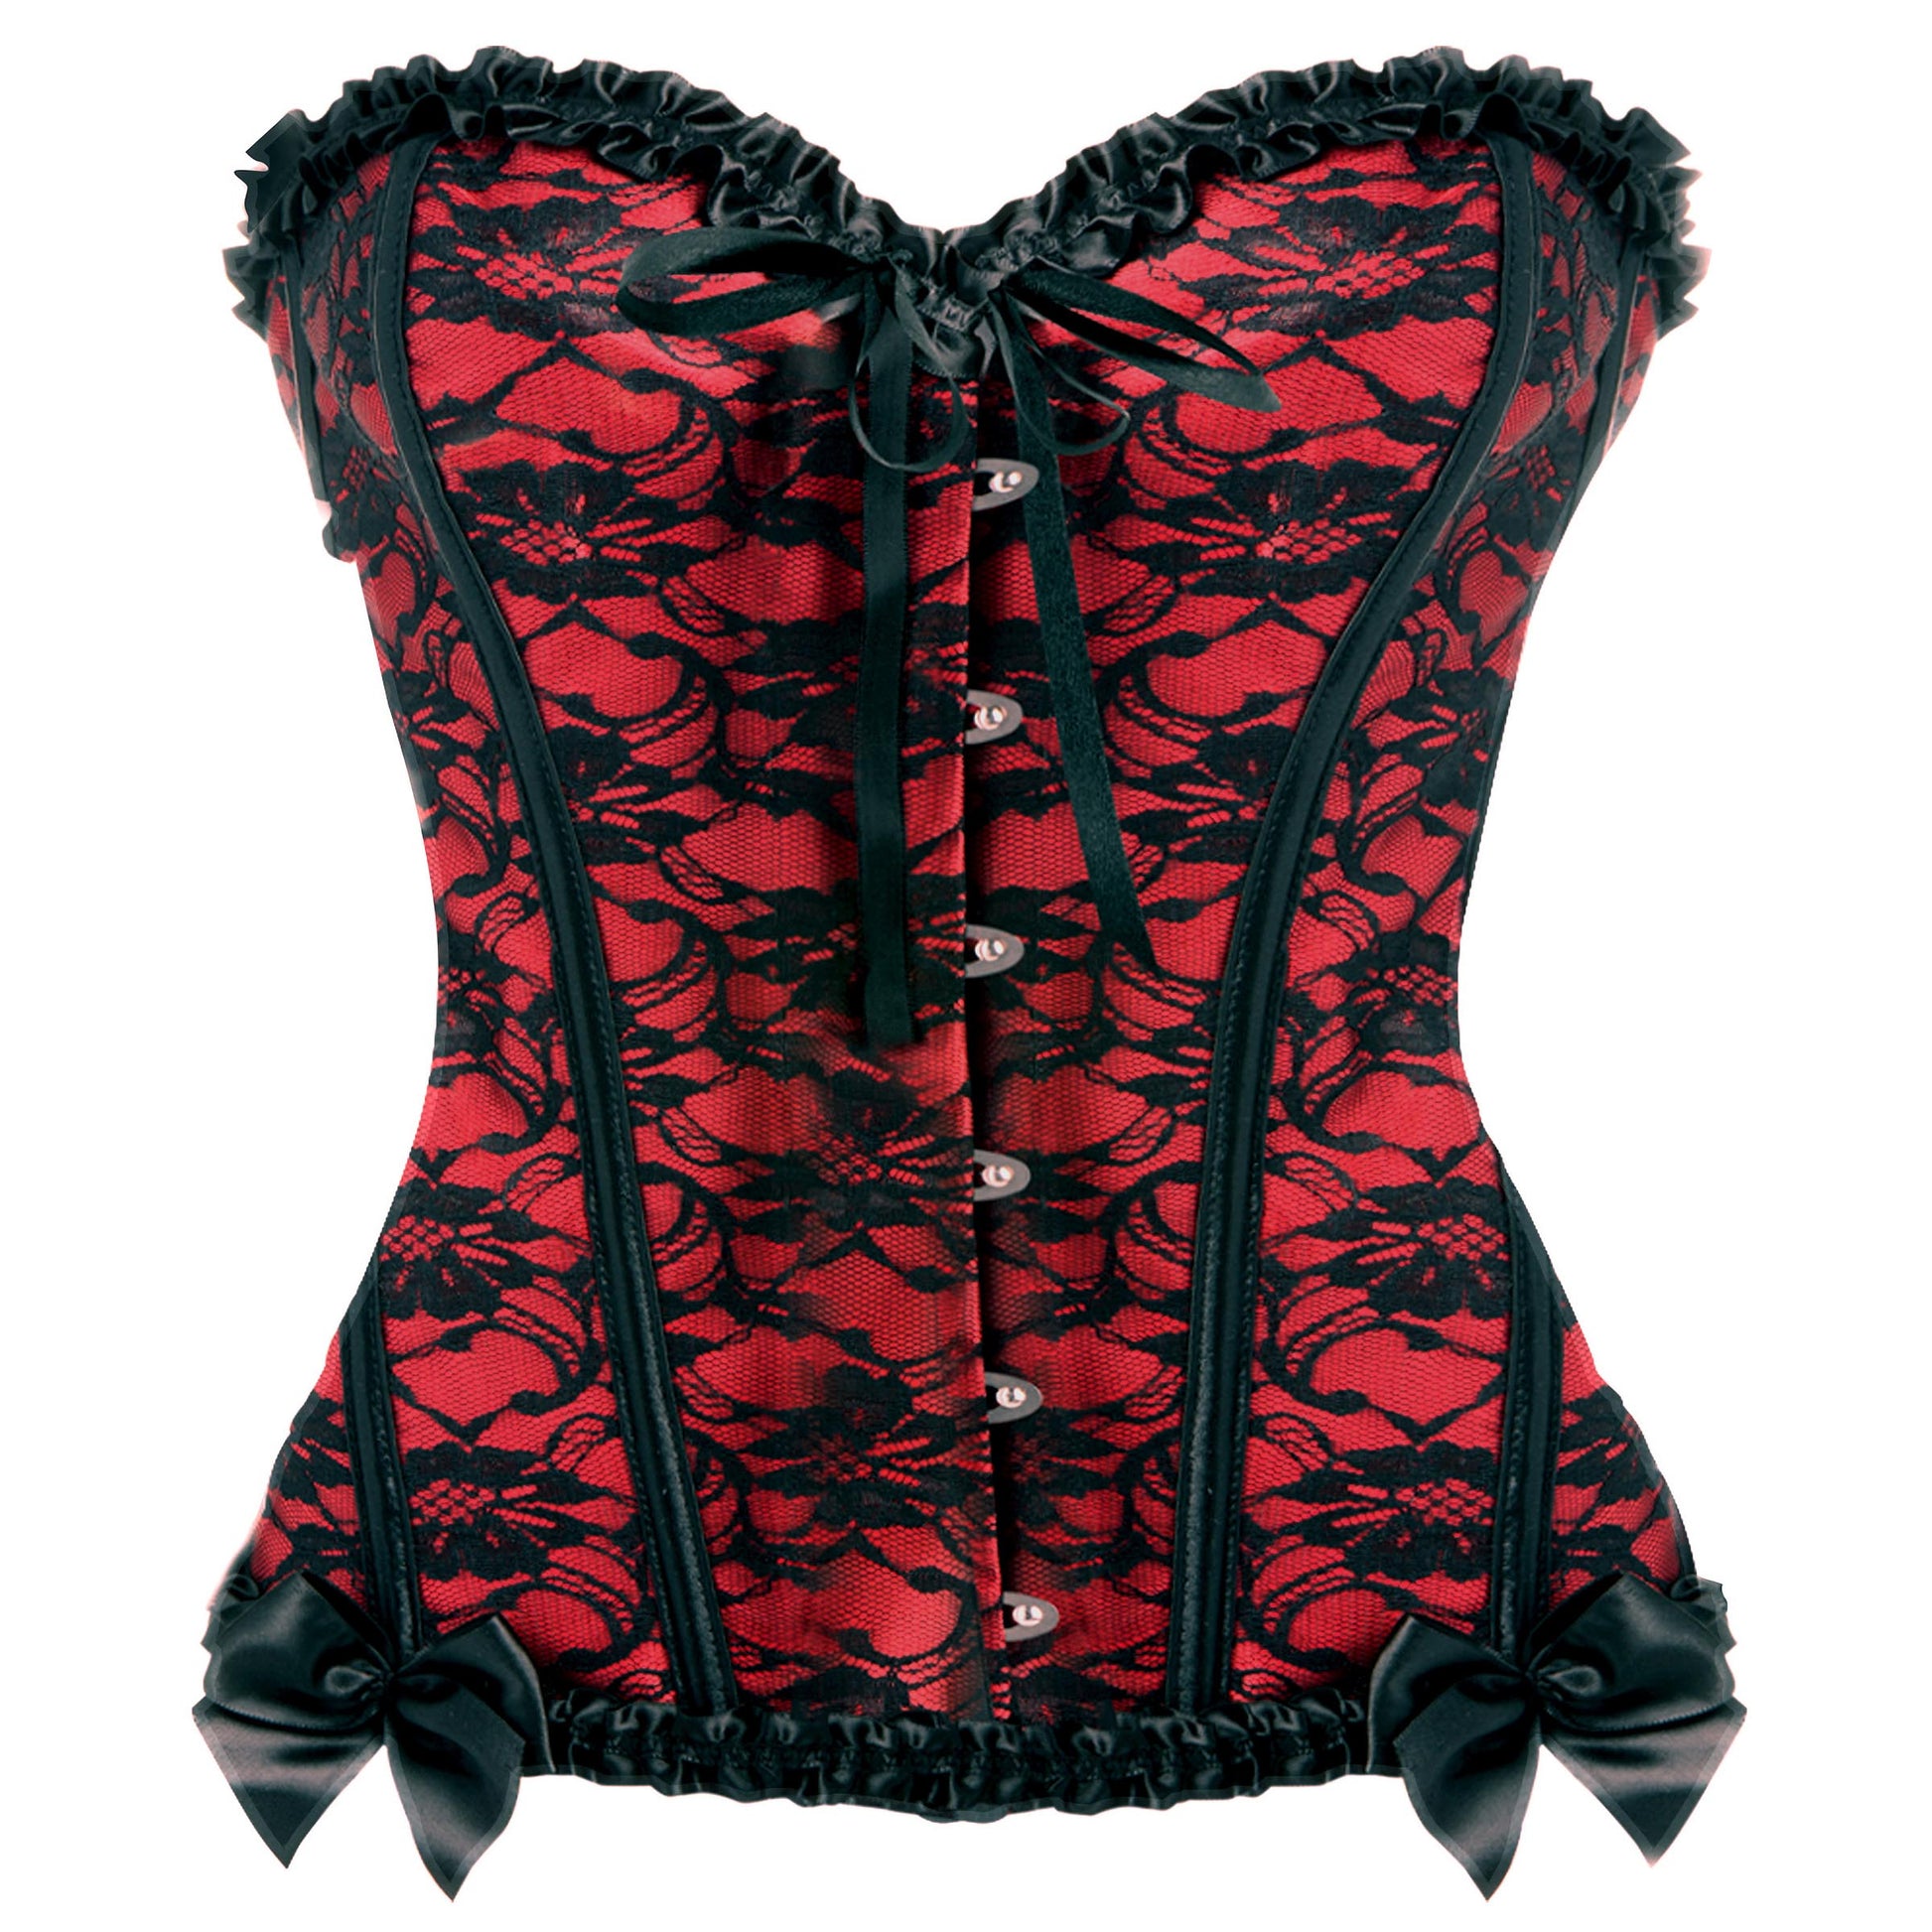 Scarlet Seduction Lace-up Corset and Thong - XL - UABDSM